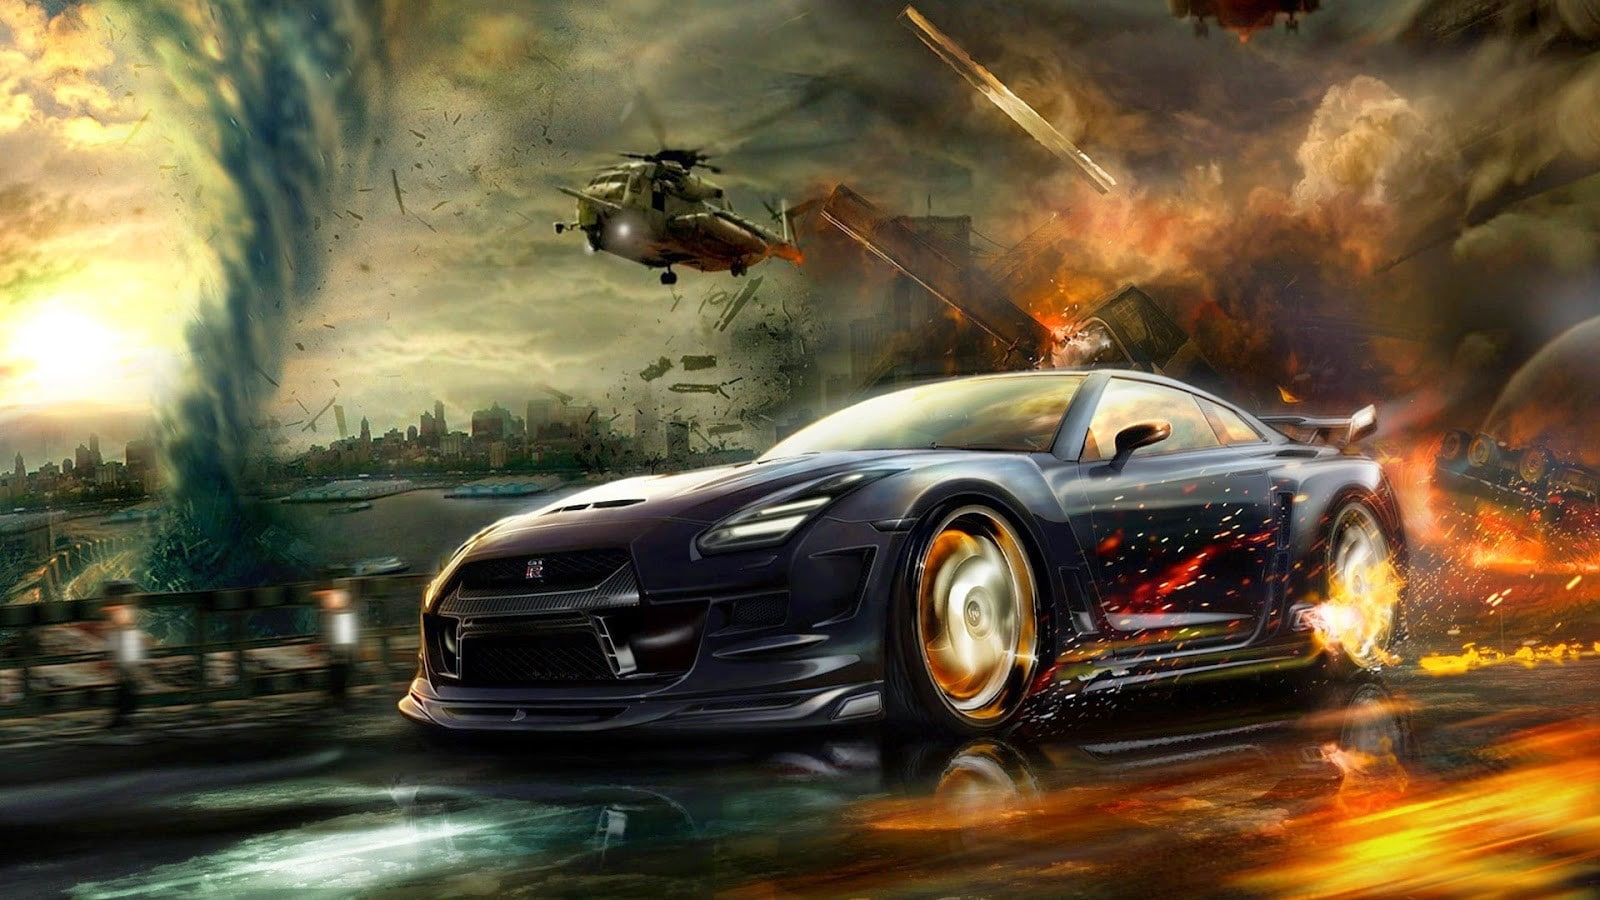 artwork, fantasy Art, Need For Speed: No Limits, Racer, Rally Cars